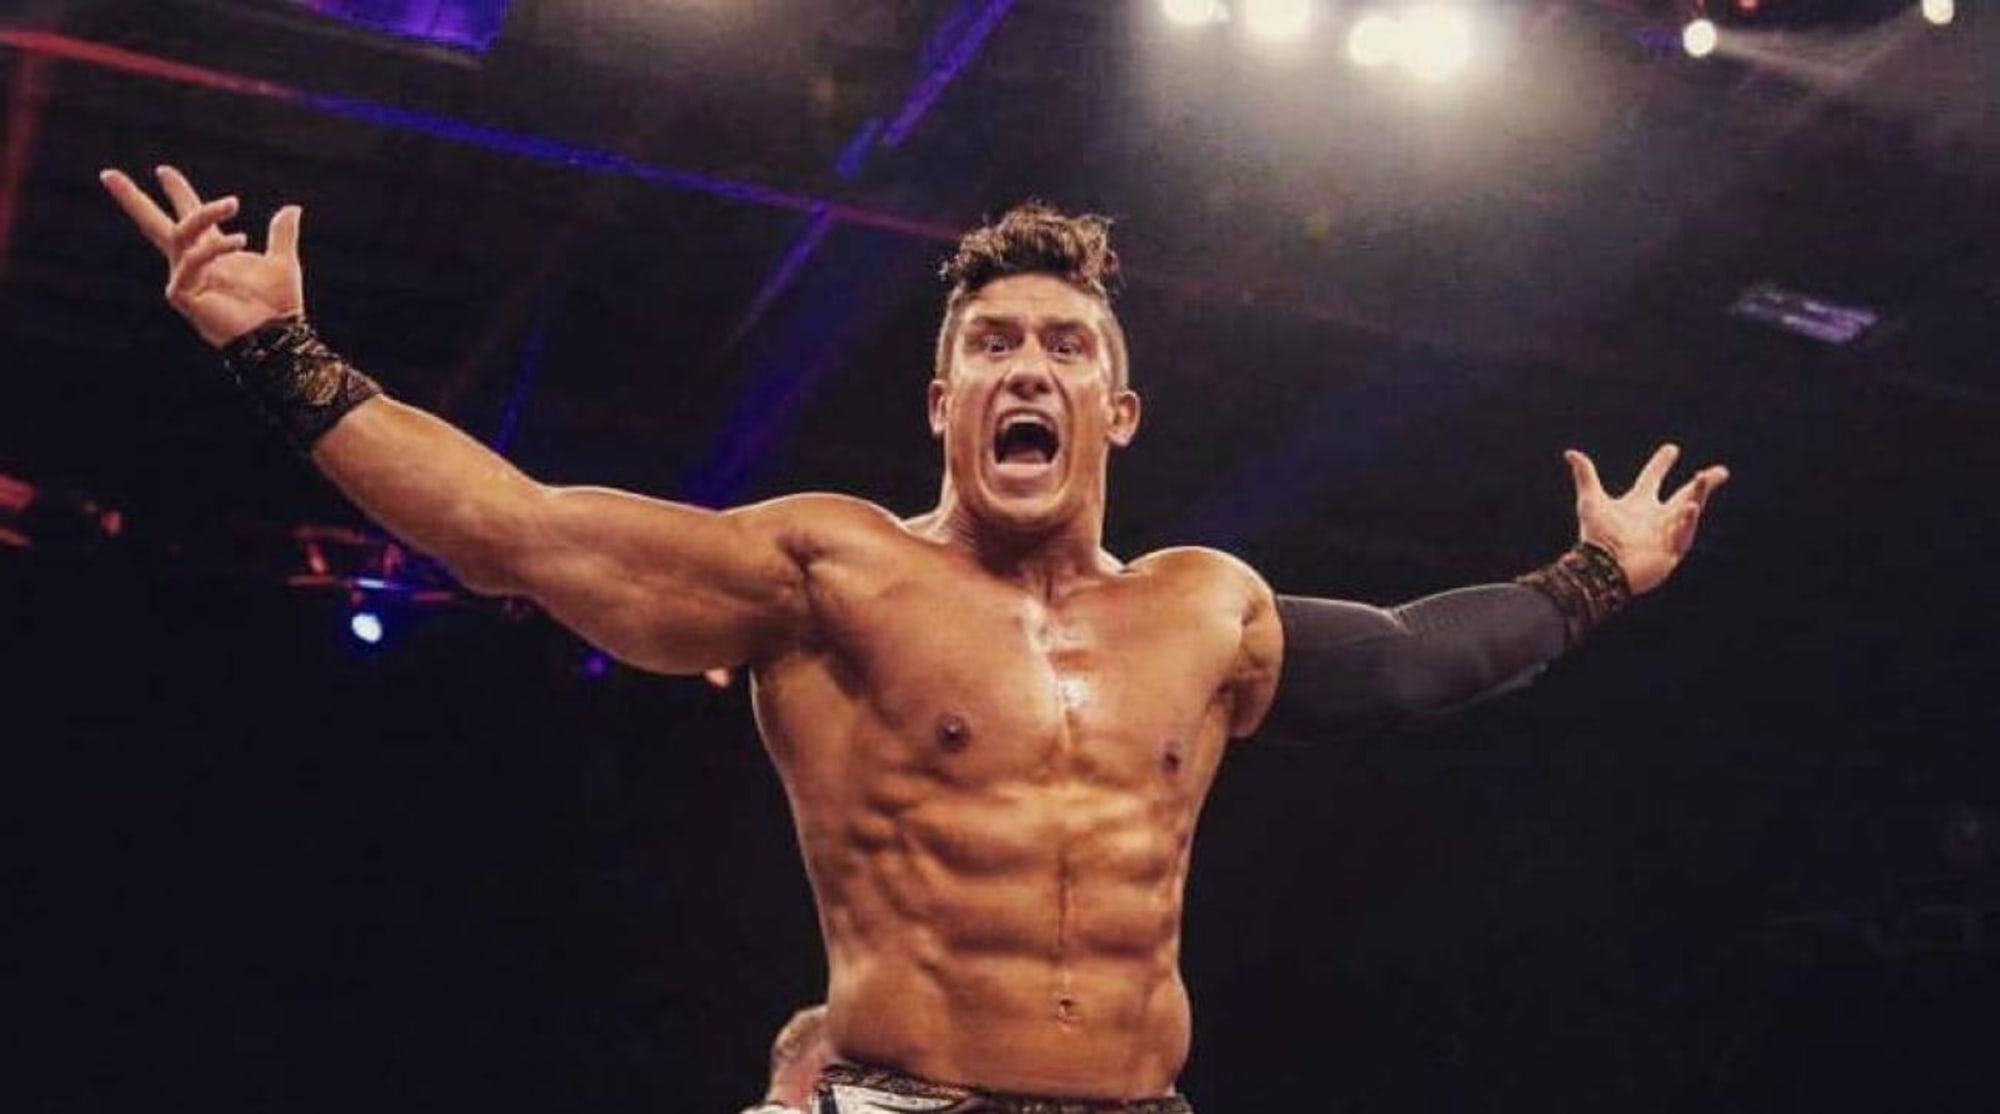 Details about EC3 being pulled from NWA Chicago debut